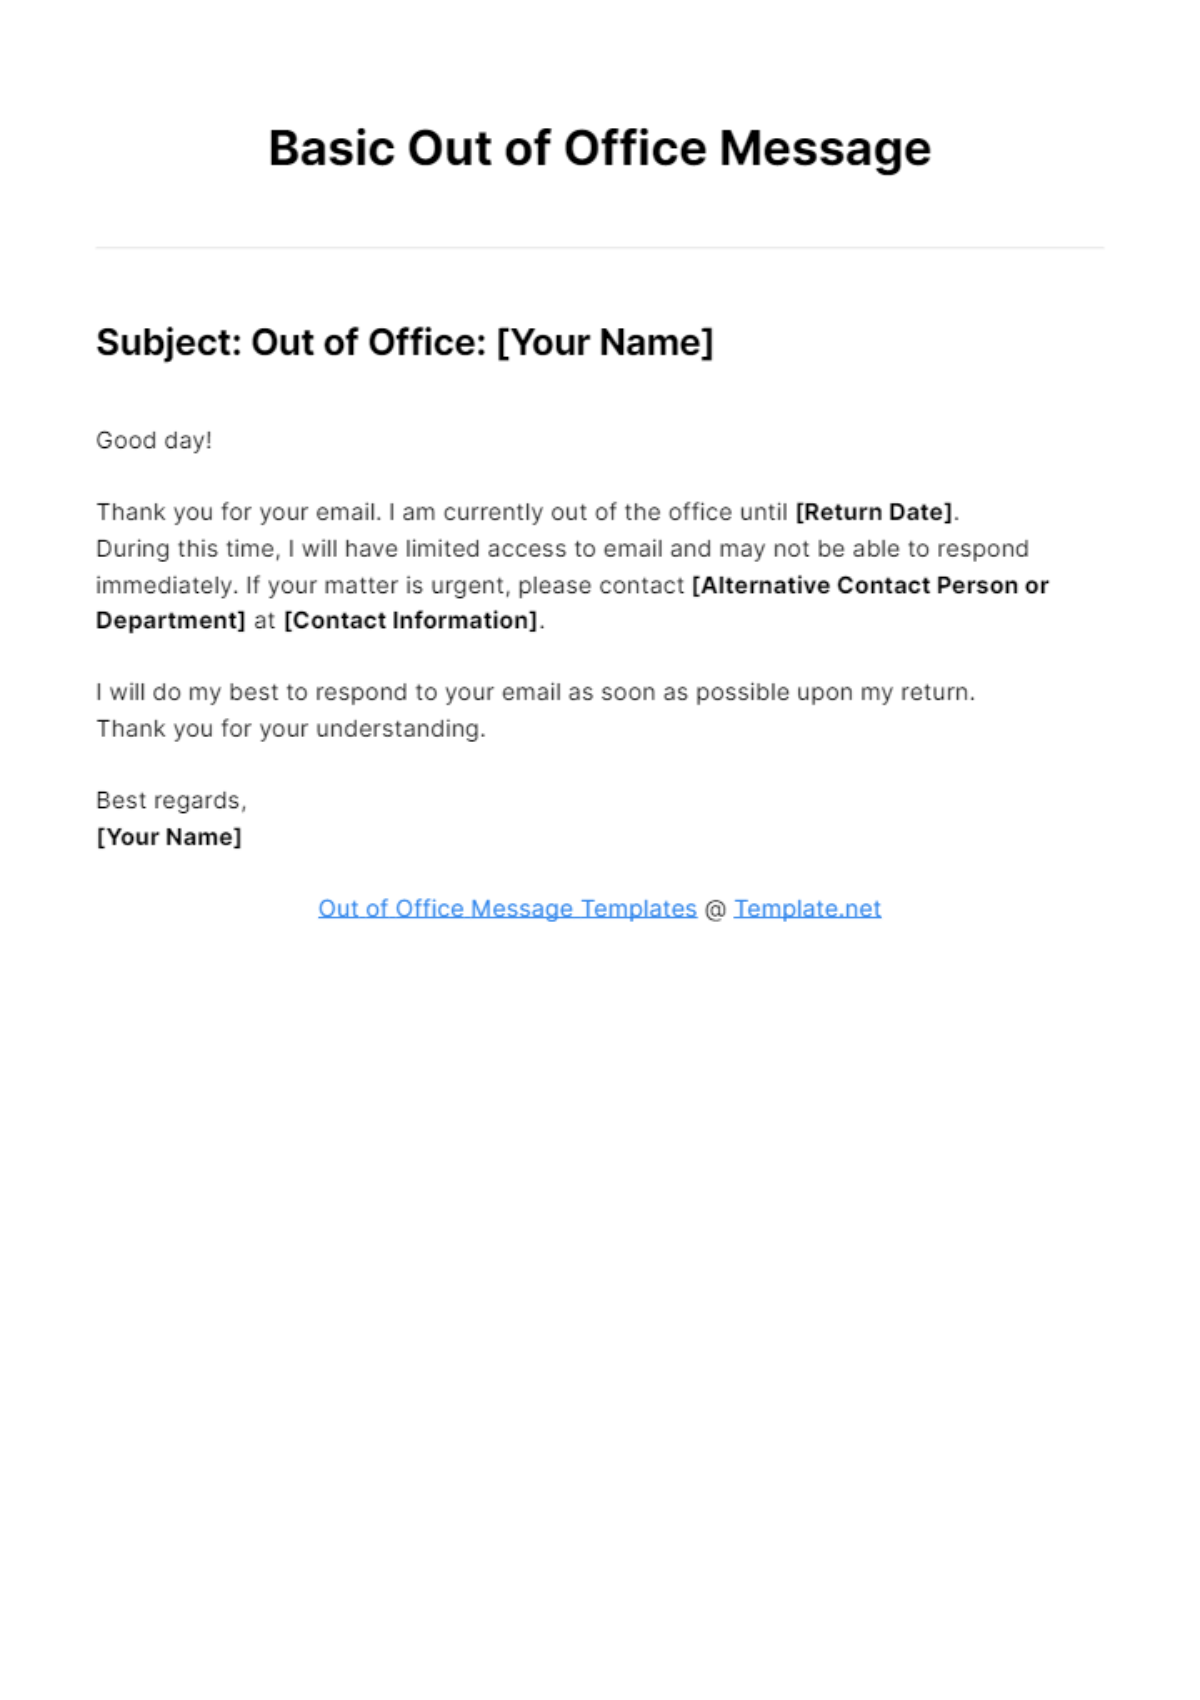 Basic Out of Office Message Template